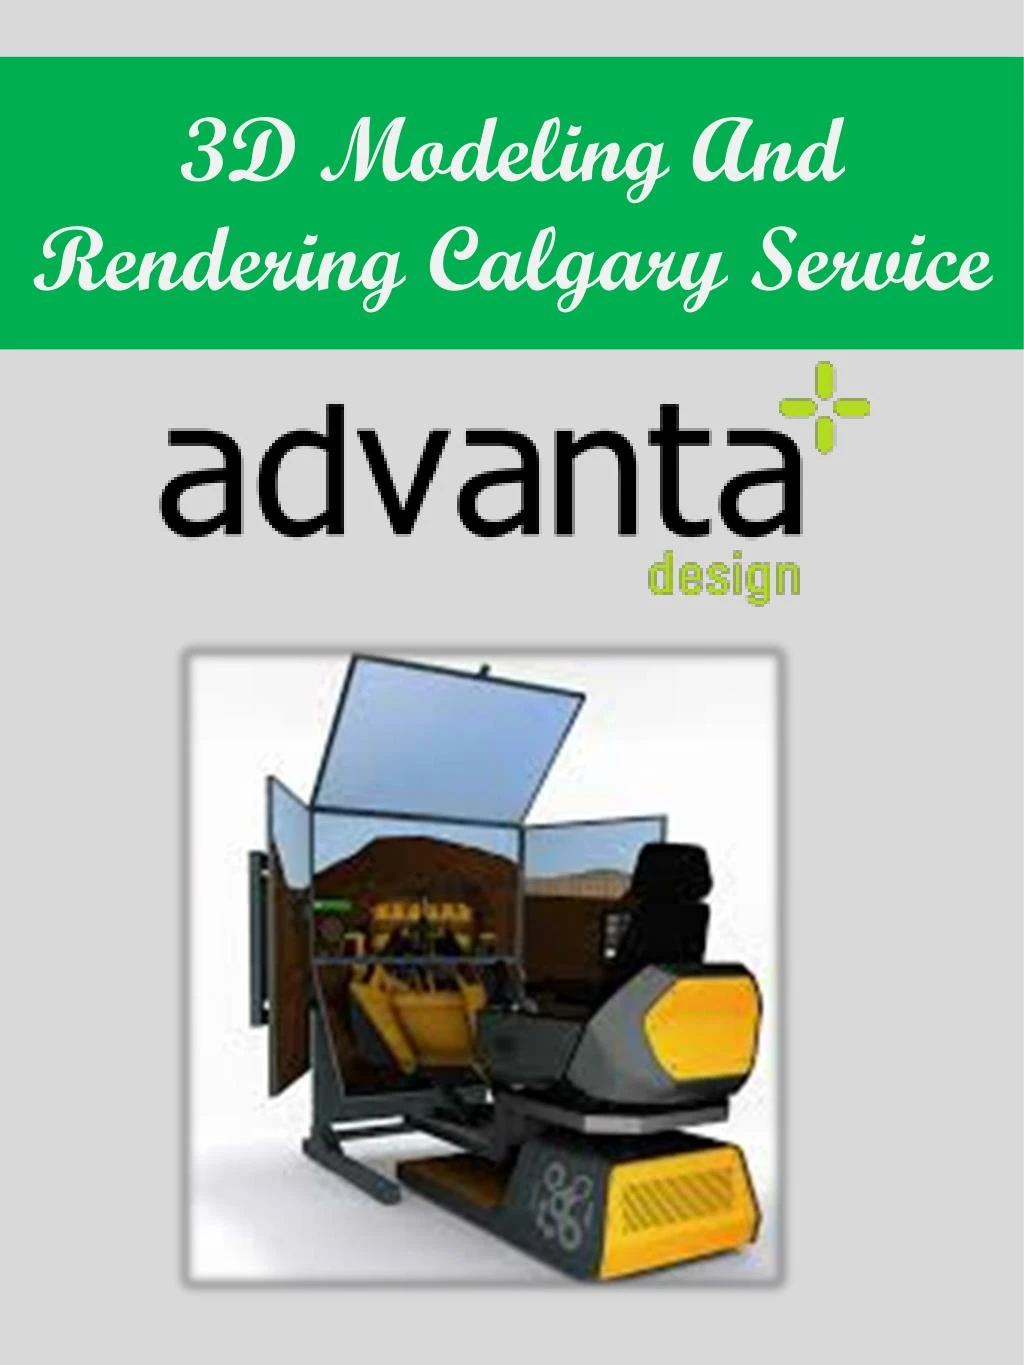 3d modeling and rendering calgary service